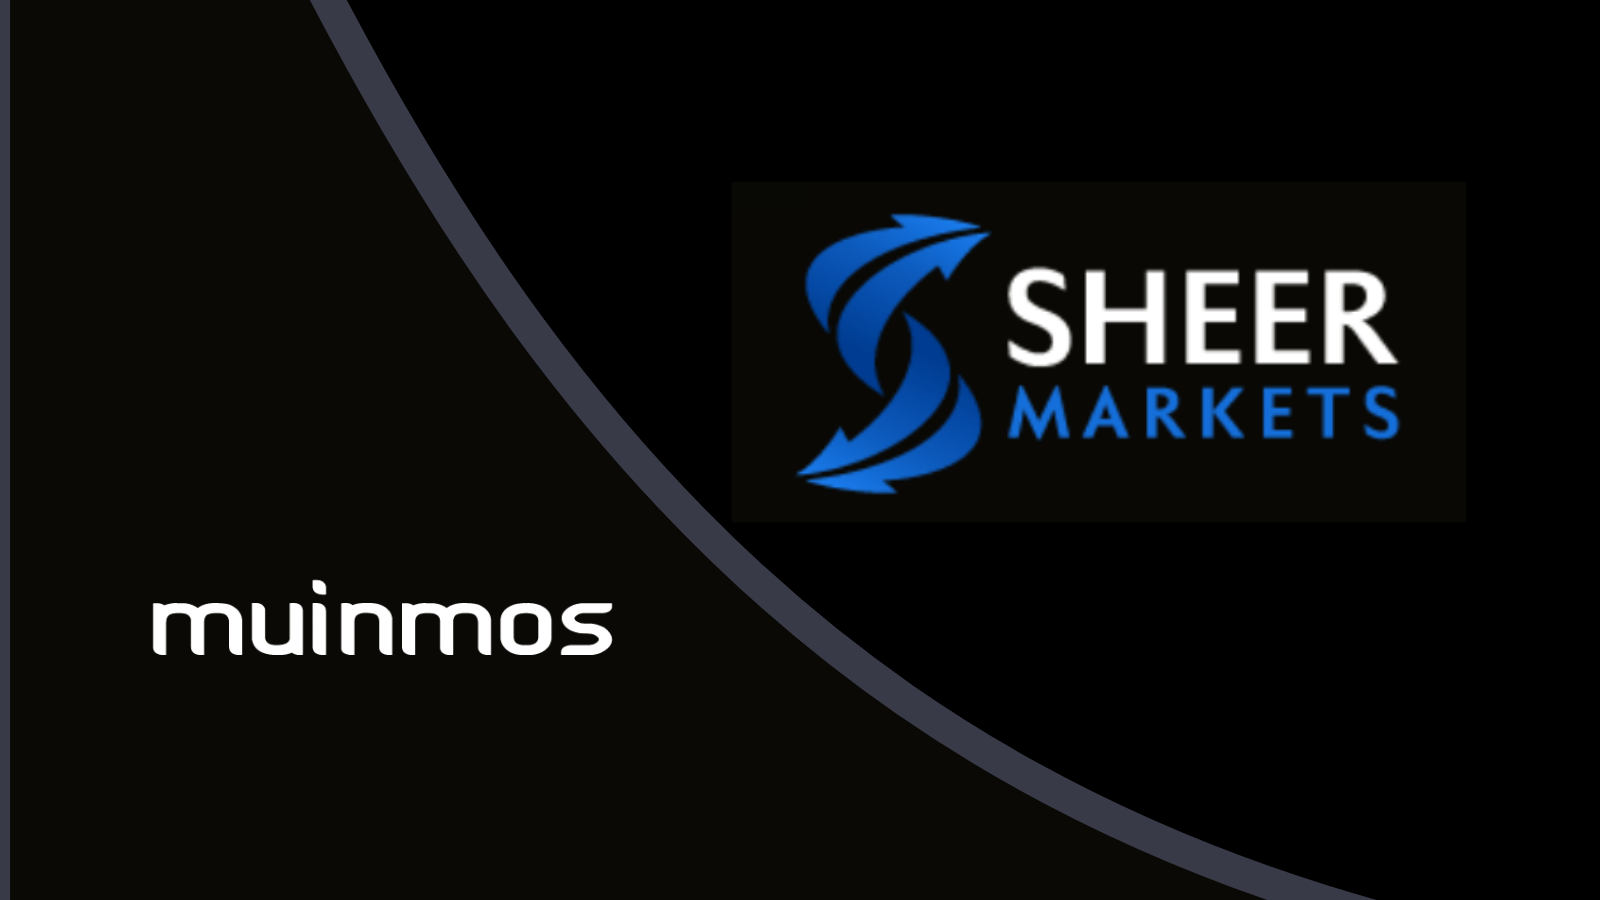 Sheer Markets Selects Muinmos for Fast Onboarding & Regulatory Compliance